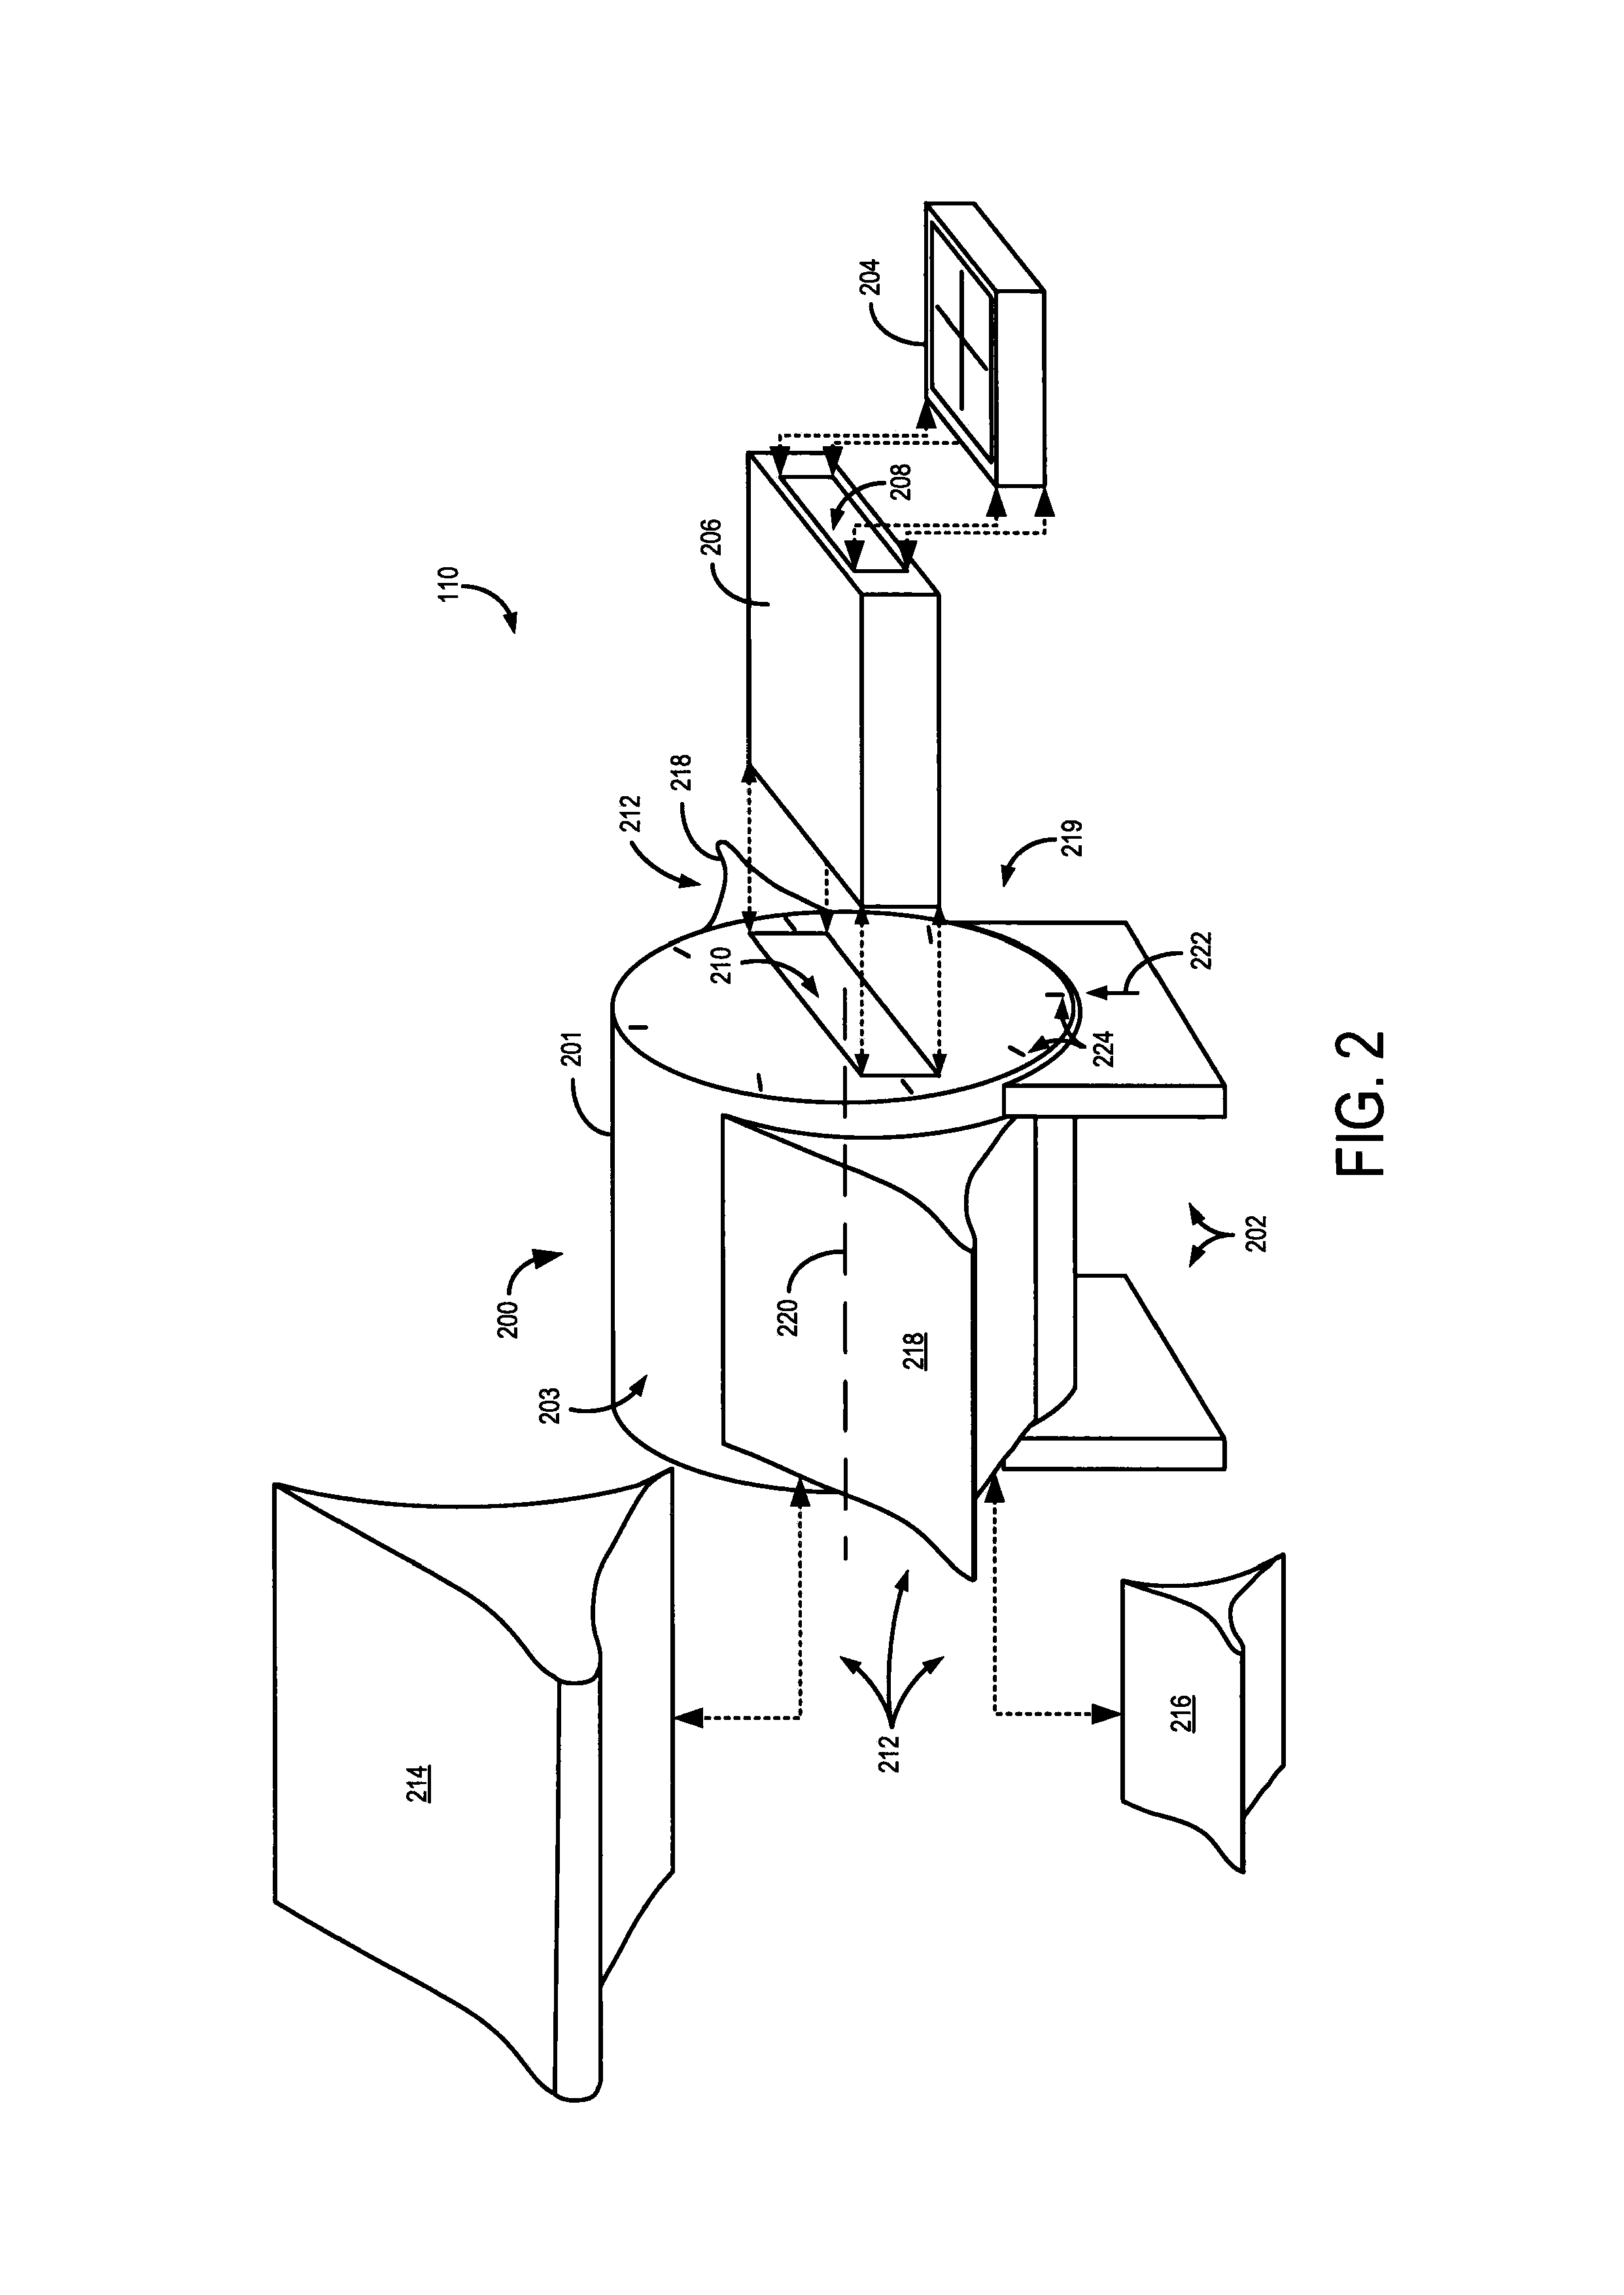 System and method for improved radiation dosimetry